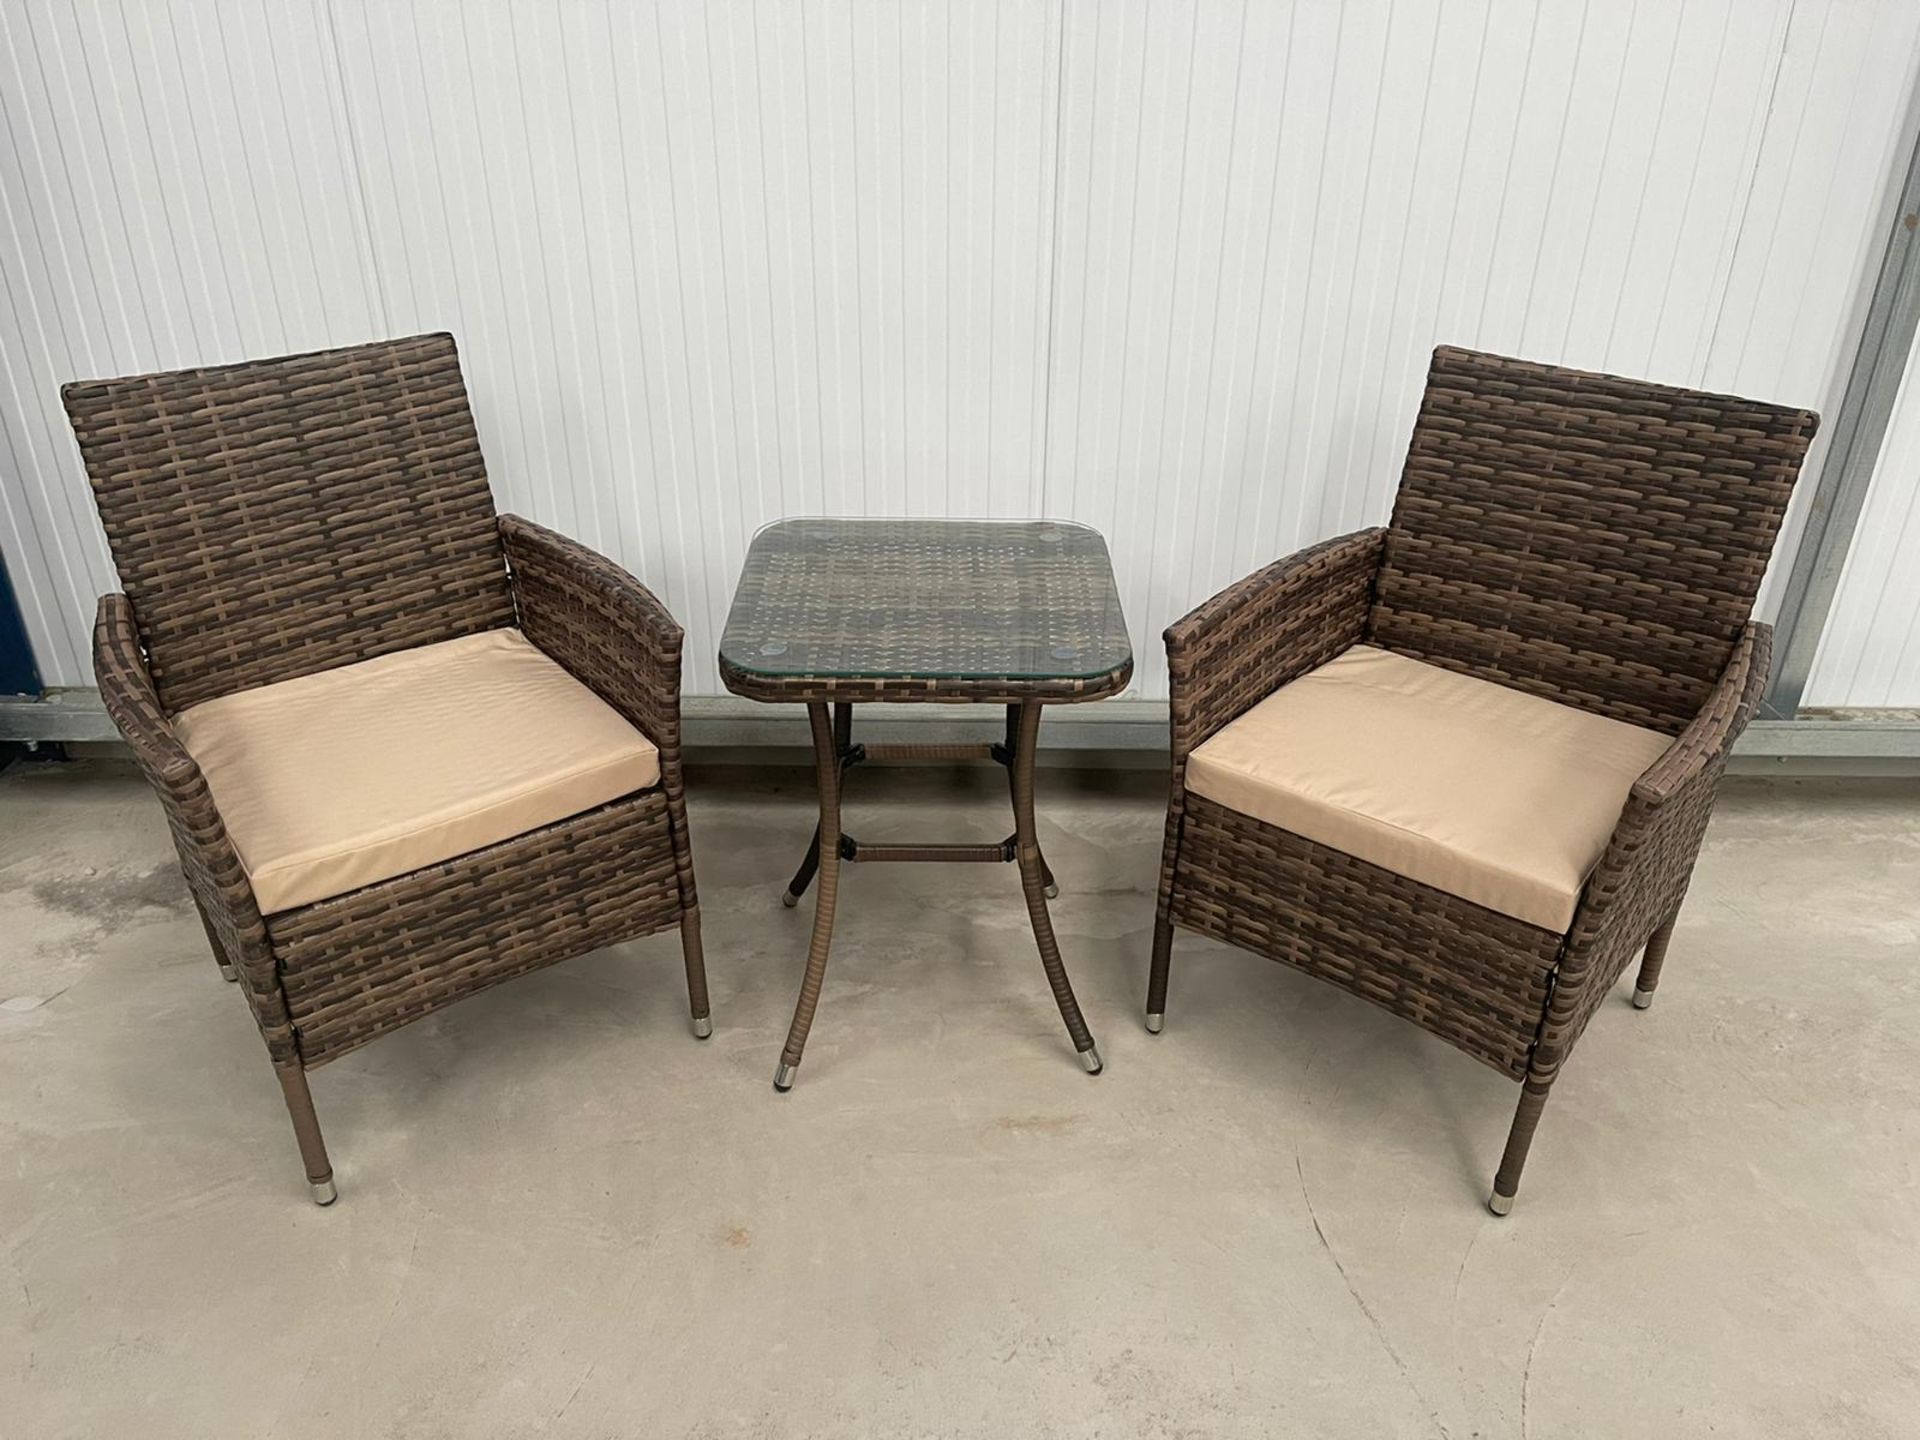 RRP £229 - NEW BROWN BISTRO SET WITH TALL TABLE. TABLE 46 X 46 X 62CM, CHAIR 51 X 60 X 83XM